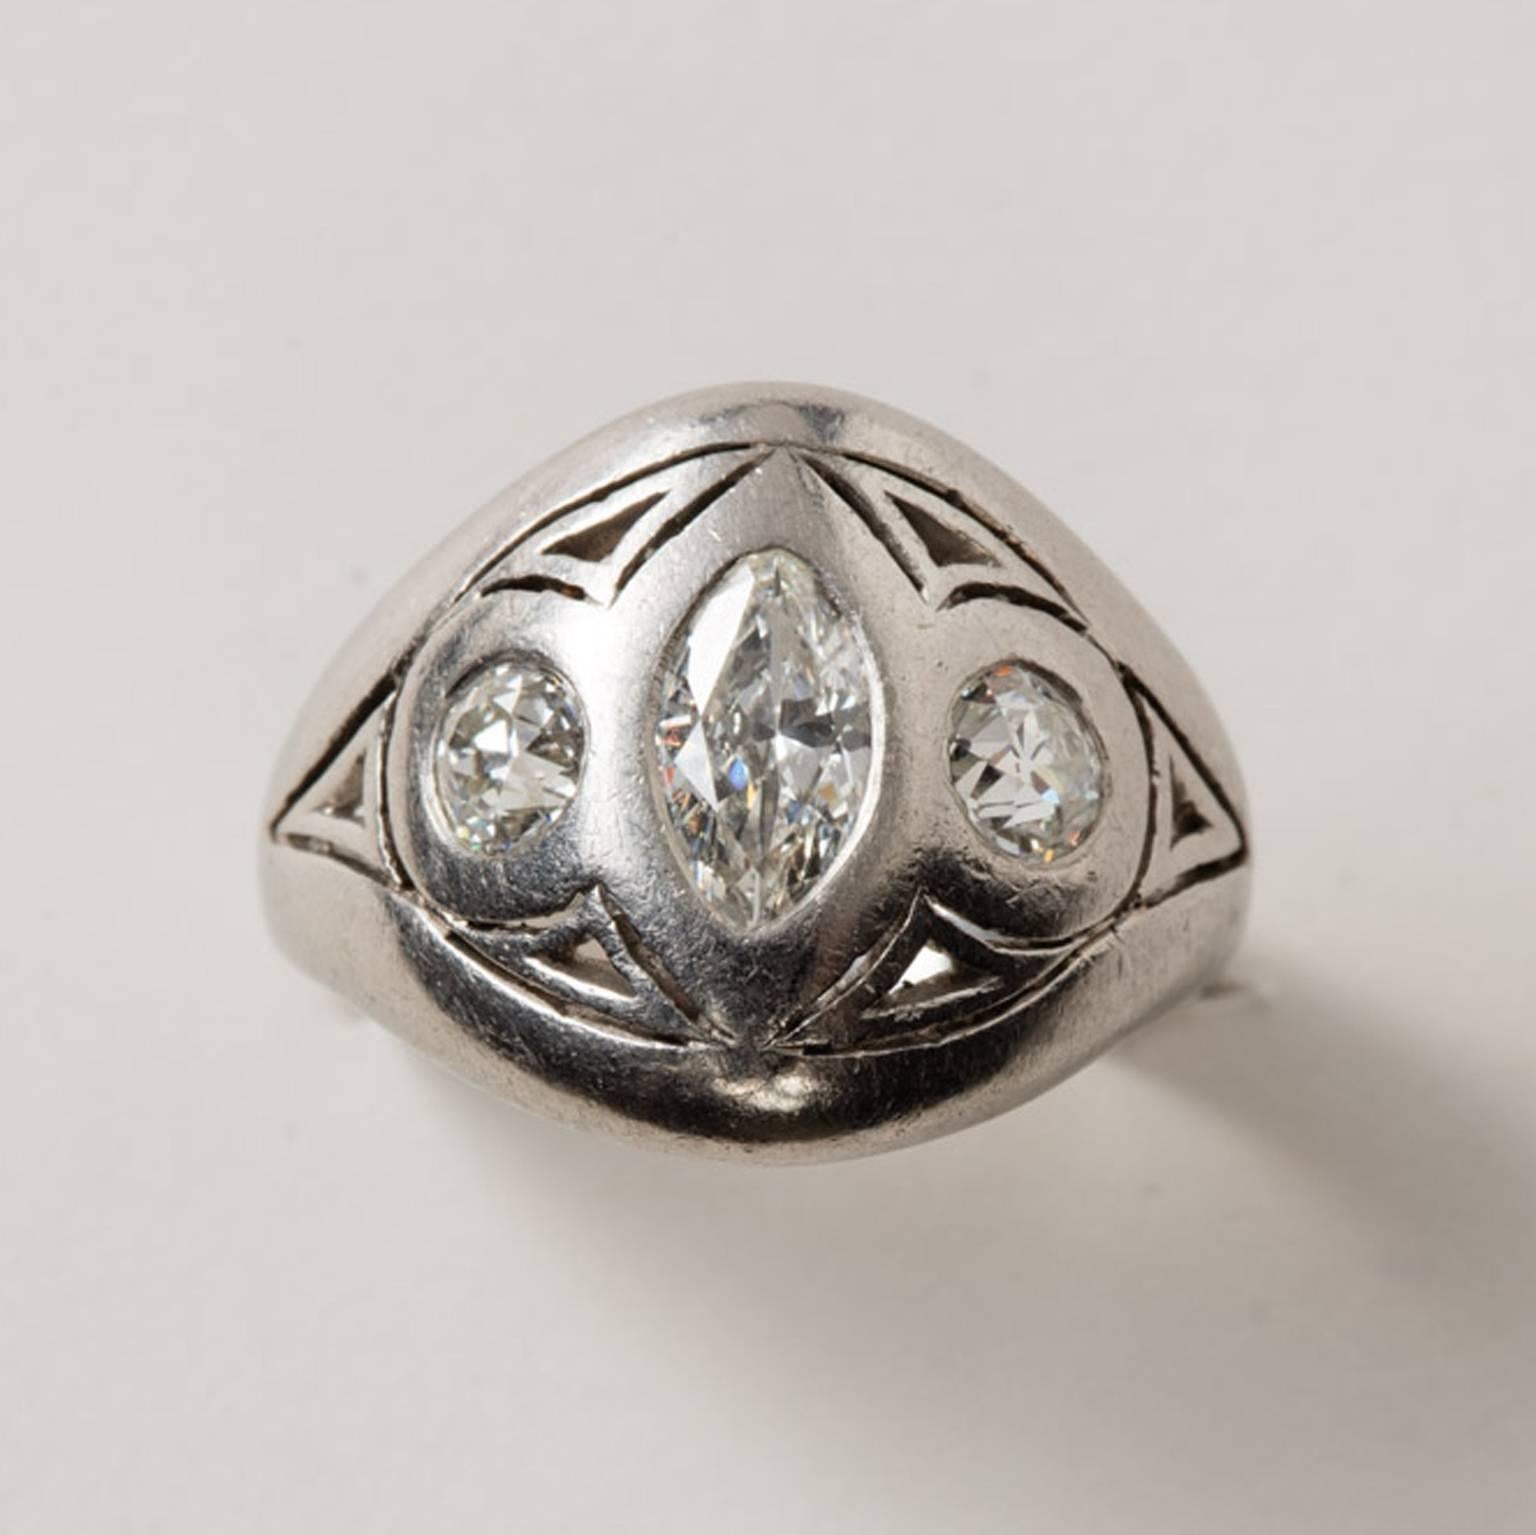 An Art Nouveau platinum and diamond (app. 1.45 carats) ring with triangle open worked decorations, circa 1900, USA.

weight: 9.4 grams
height: 1.6 cm 